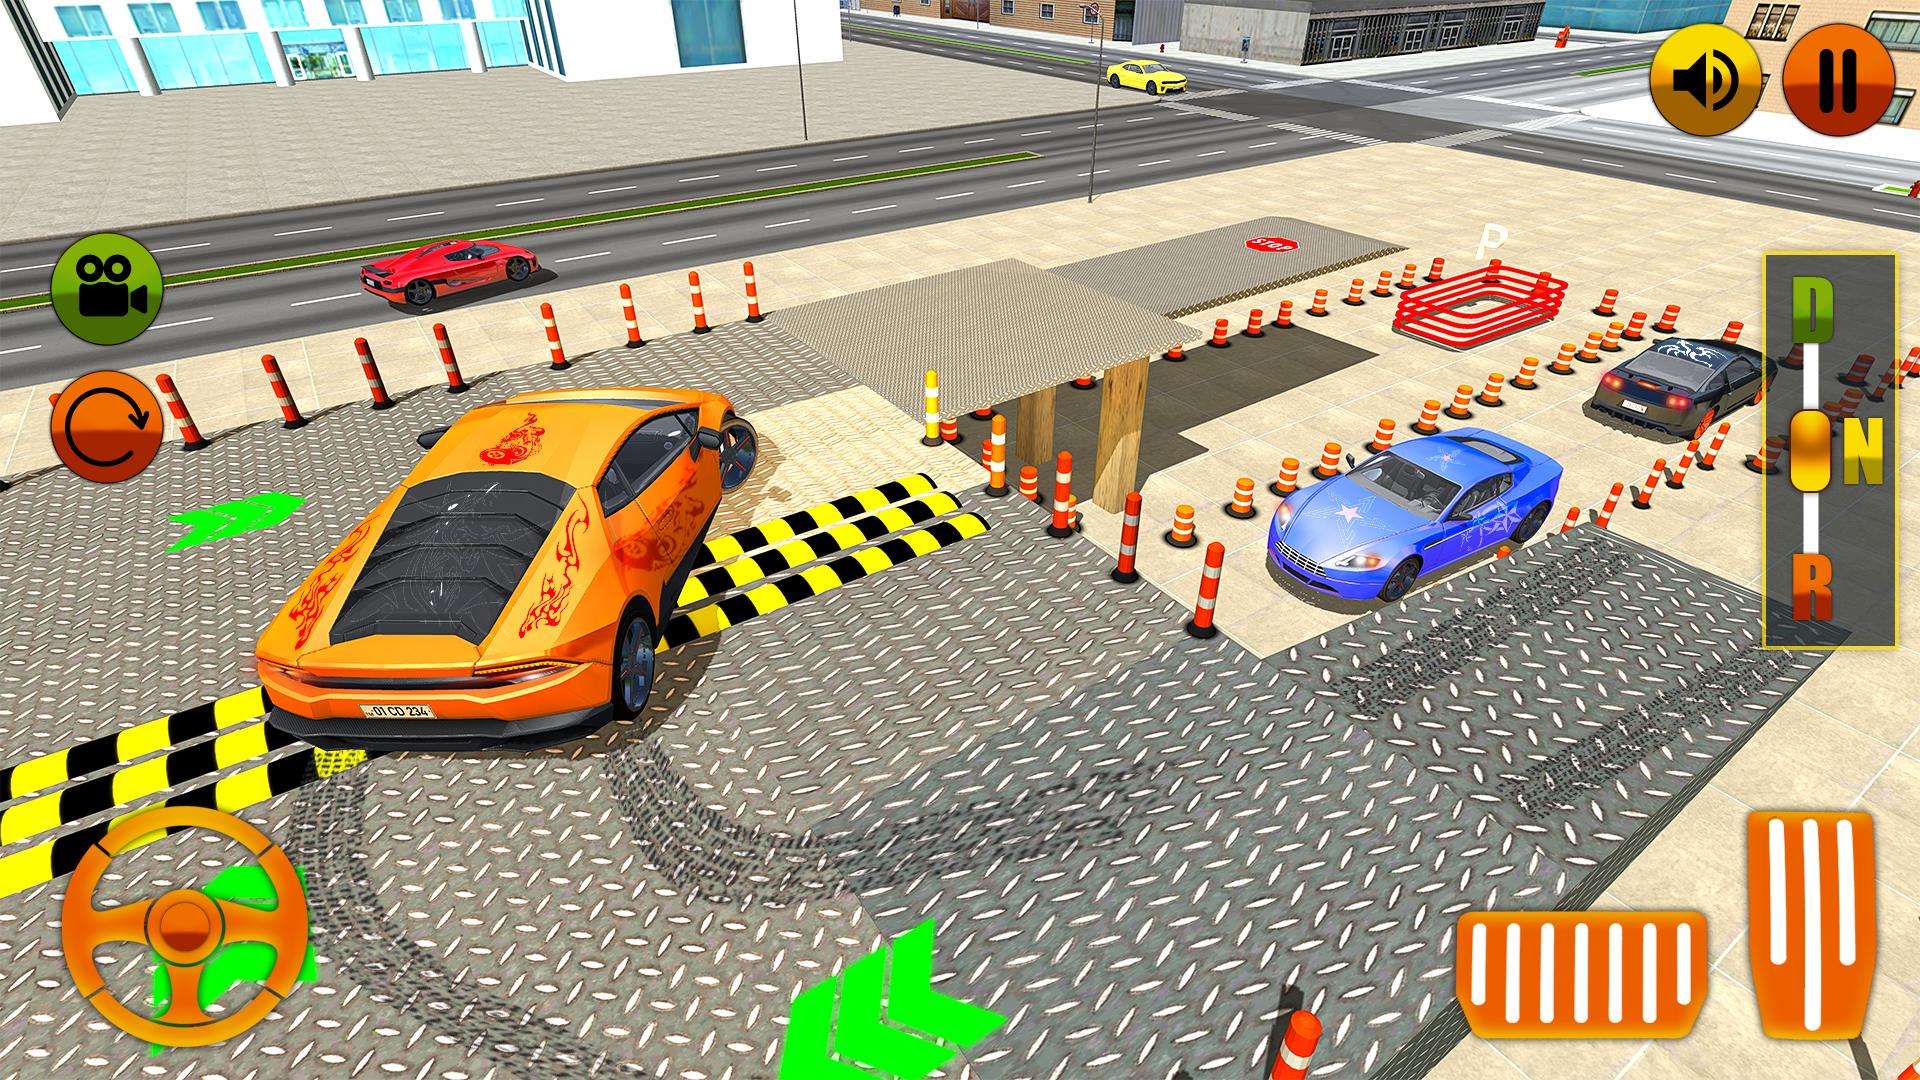 Игра кар драйвер. Car parking игра. Real car Park Simulation 3d. 3d parking Simulator. Pacogames Android.